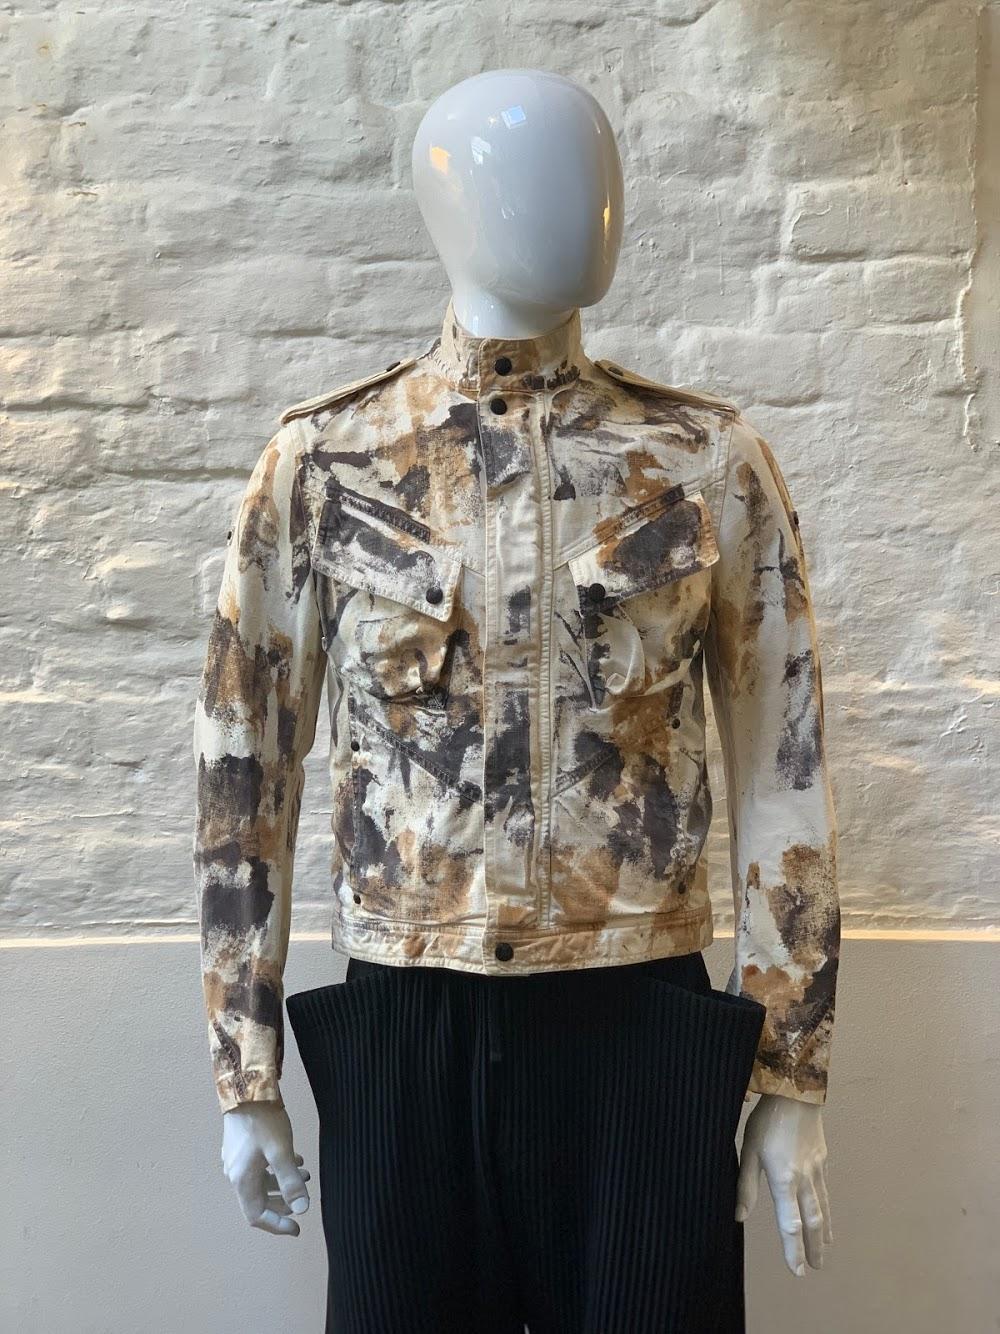 Voyage 90s Paint Print Jacket made in the UK from cotton. 

The notorious Fulham Road boutique Voyage was founded in 1991 by the then husband and wife team of Tiziano and Louise Mazzilli, the Voyage label kick-started the craze for boho chic.

Every